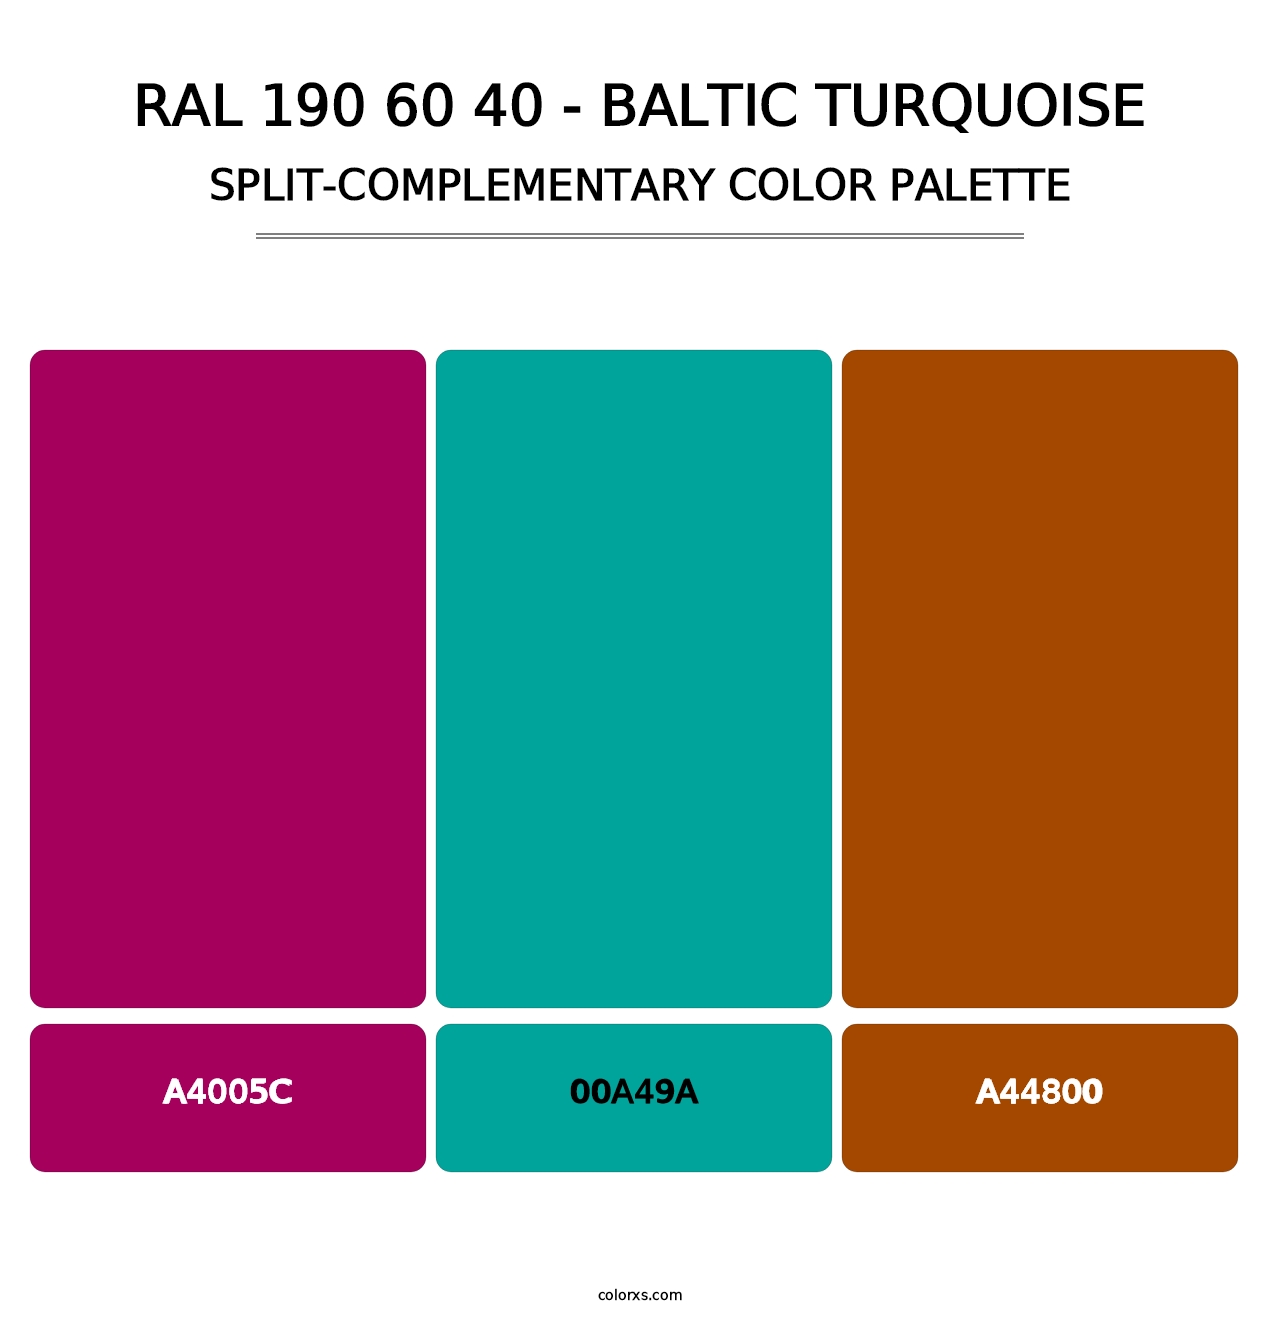 RAL 190 60 40 - Baltic Turquoise - Split-Complementary Color Palette